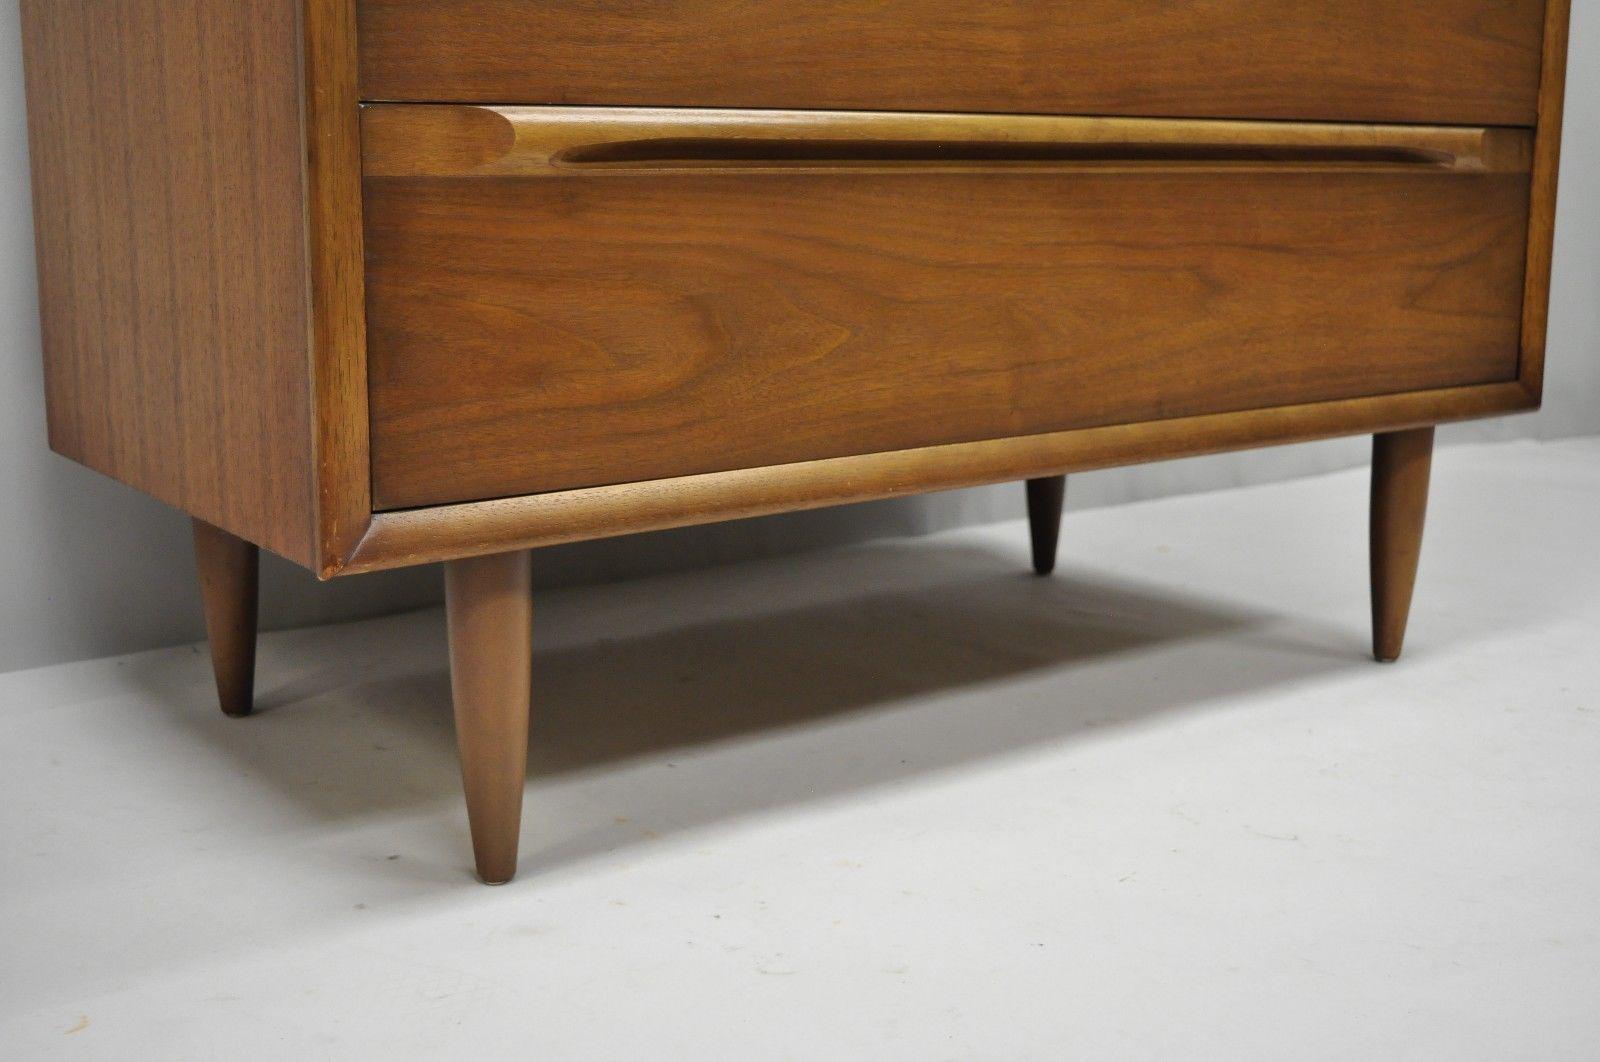 American Vintage Danish Modern Walnut Tall Chest of Drawers Dresser Sculpted Pull